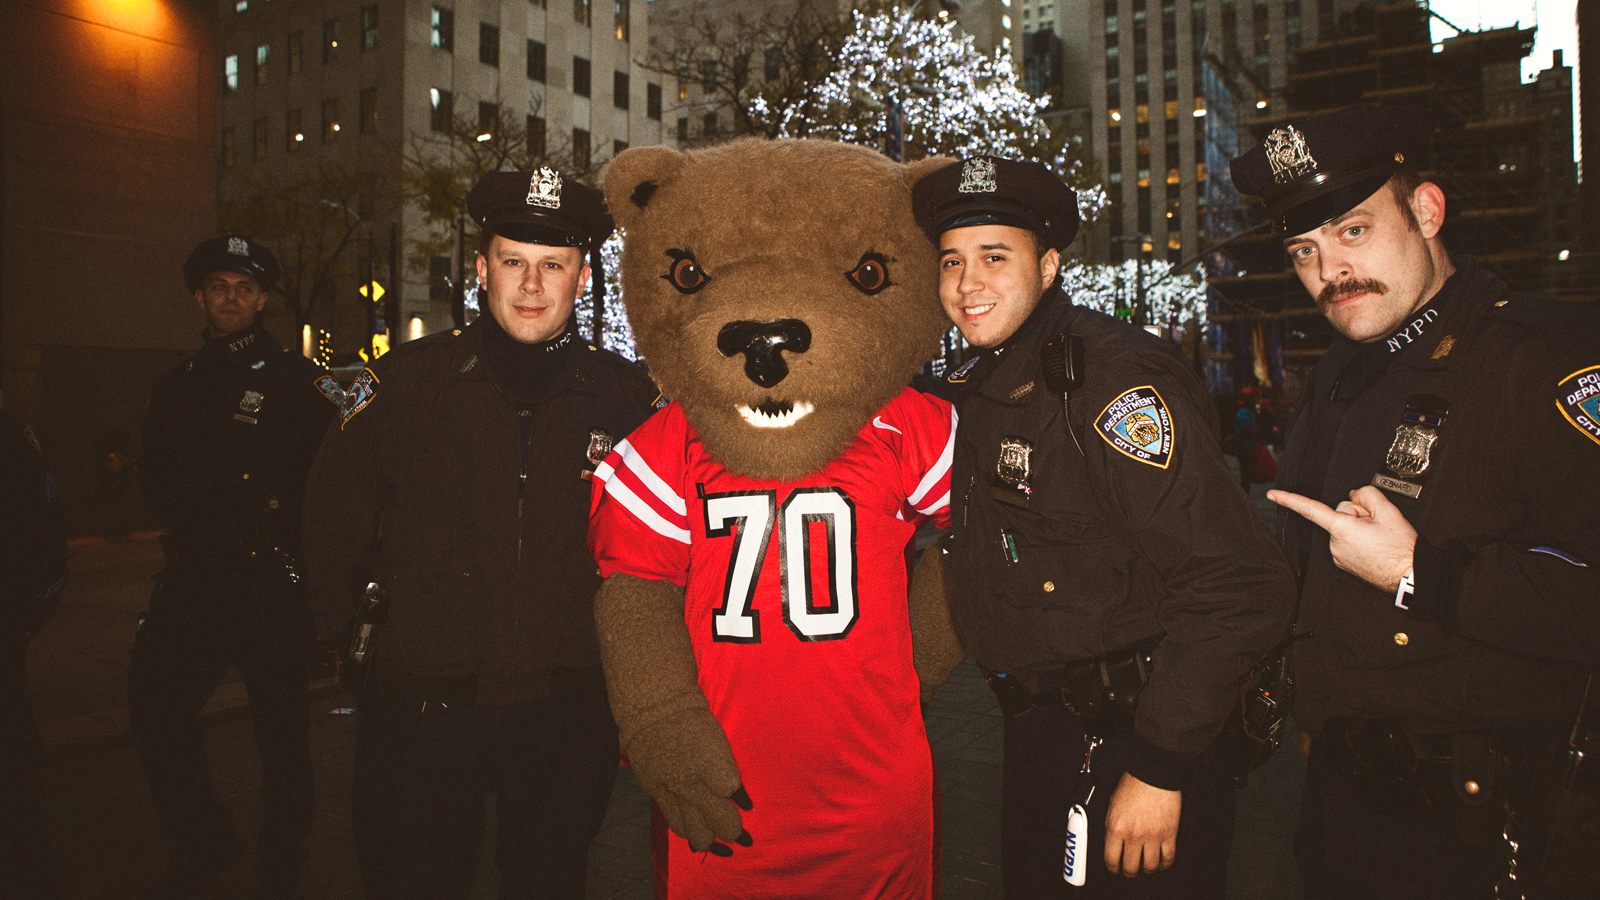 Cornell mascot Touchdown poses for a picture with New York City police officers at the Sy Katz Parade in New York City